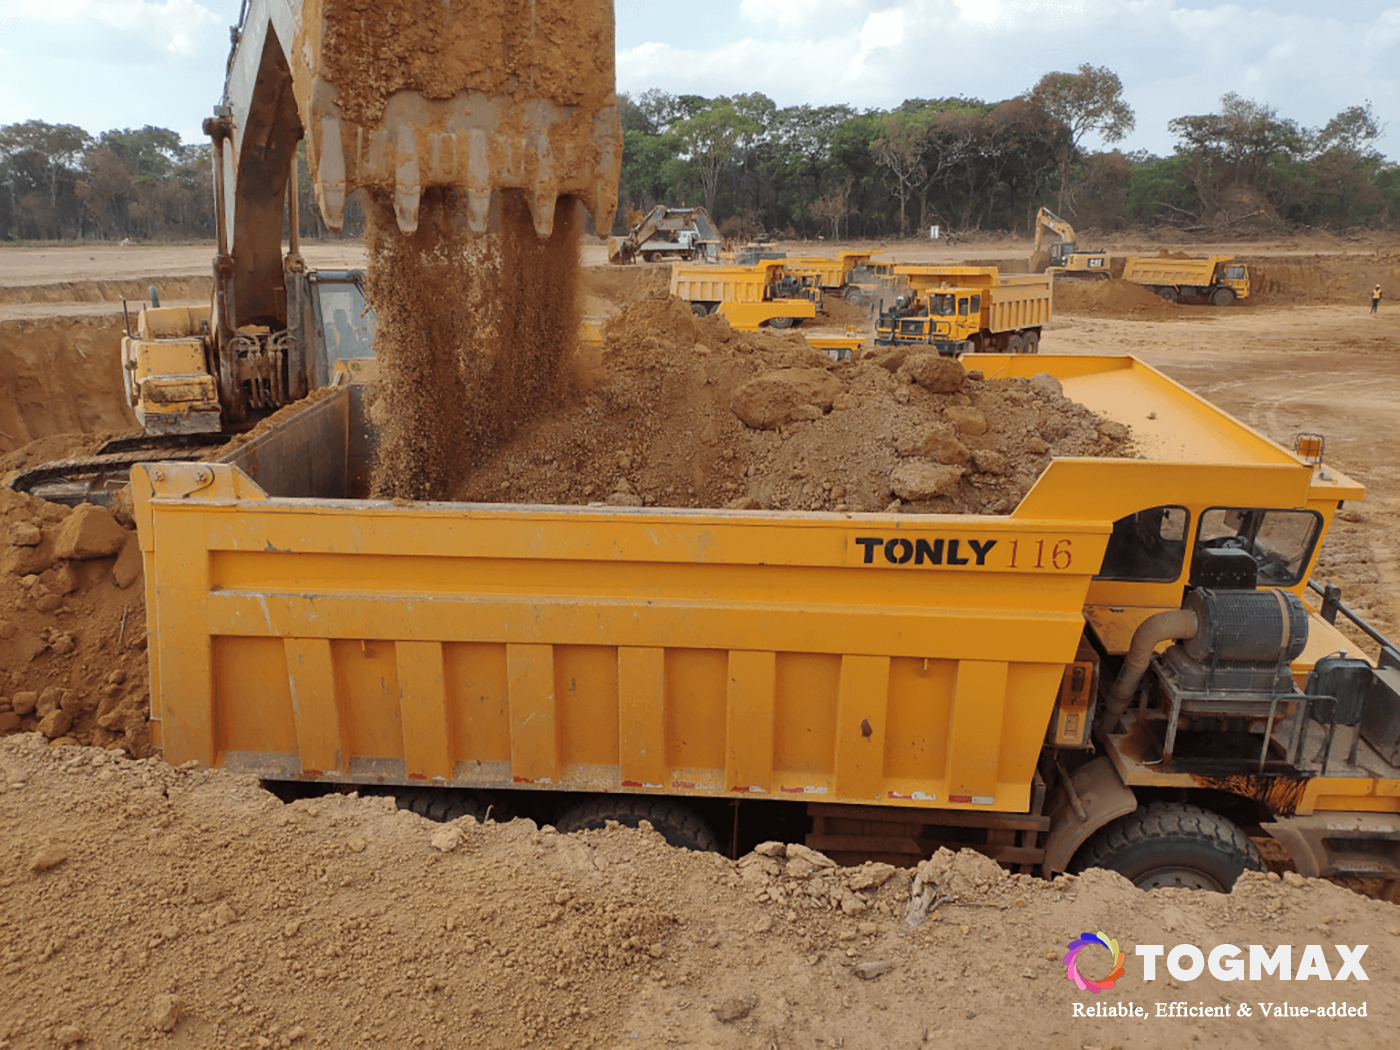 Tonly_TL875_Mining_Wide_Body_Dump_Trucks_Working_Well_in_DRCongo_Copper_Cobalt_Mines_TogMax_Group